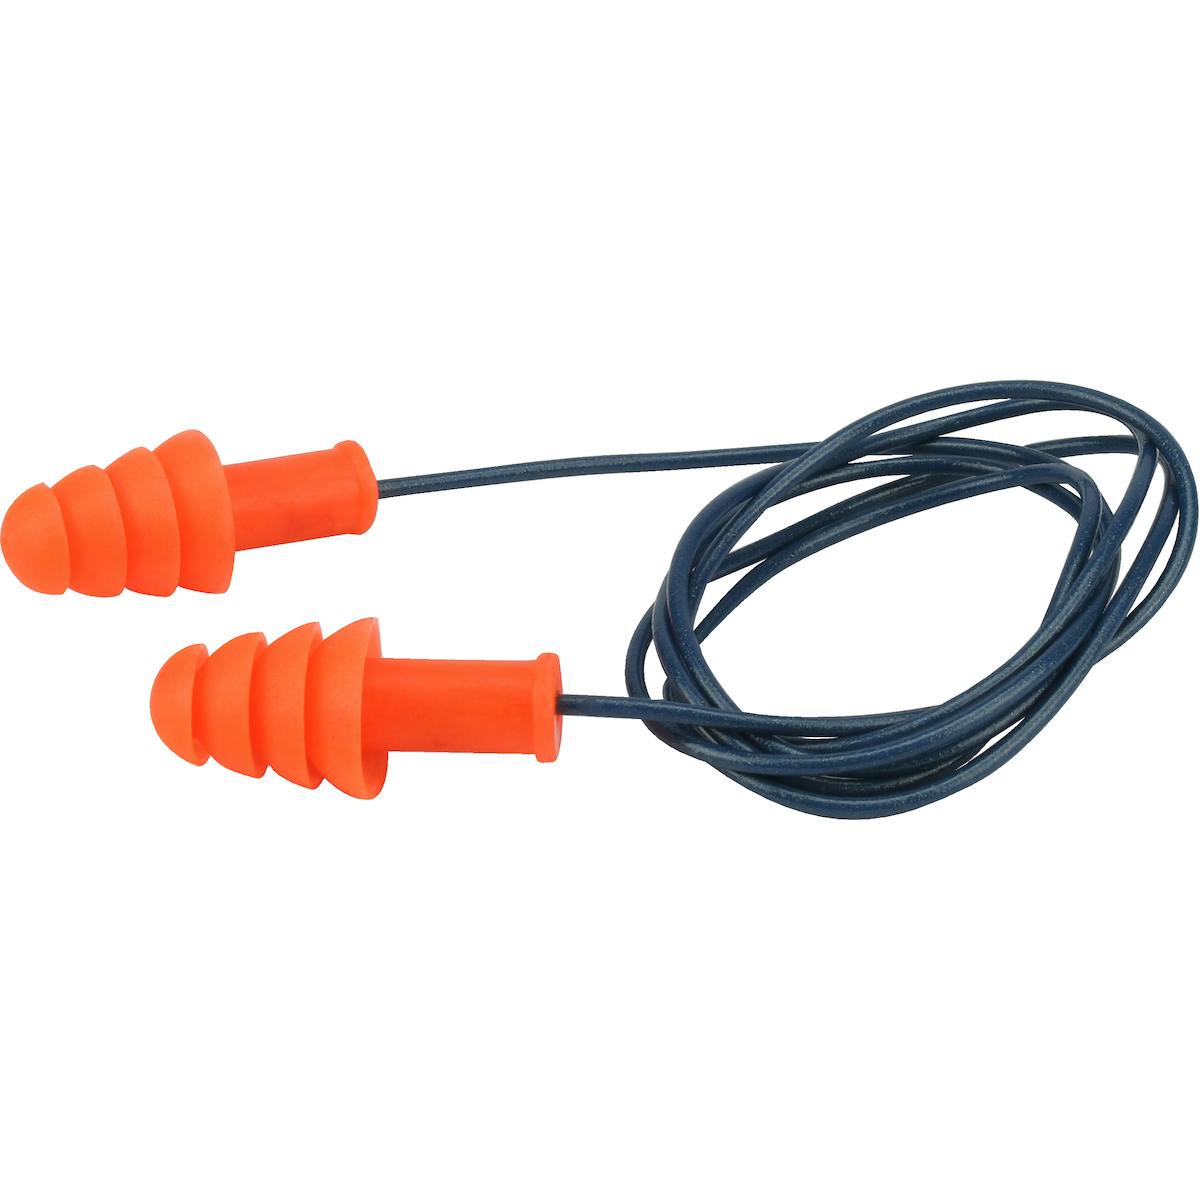 Metal Detectable Reusable TPR Corded Ear Plugs - NRR 27, Orange (267-HPR400D) - OS_0